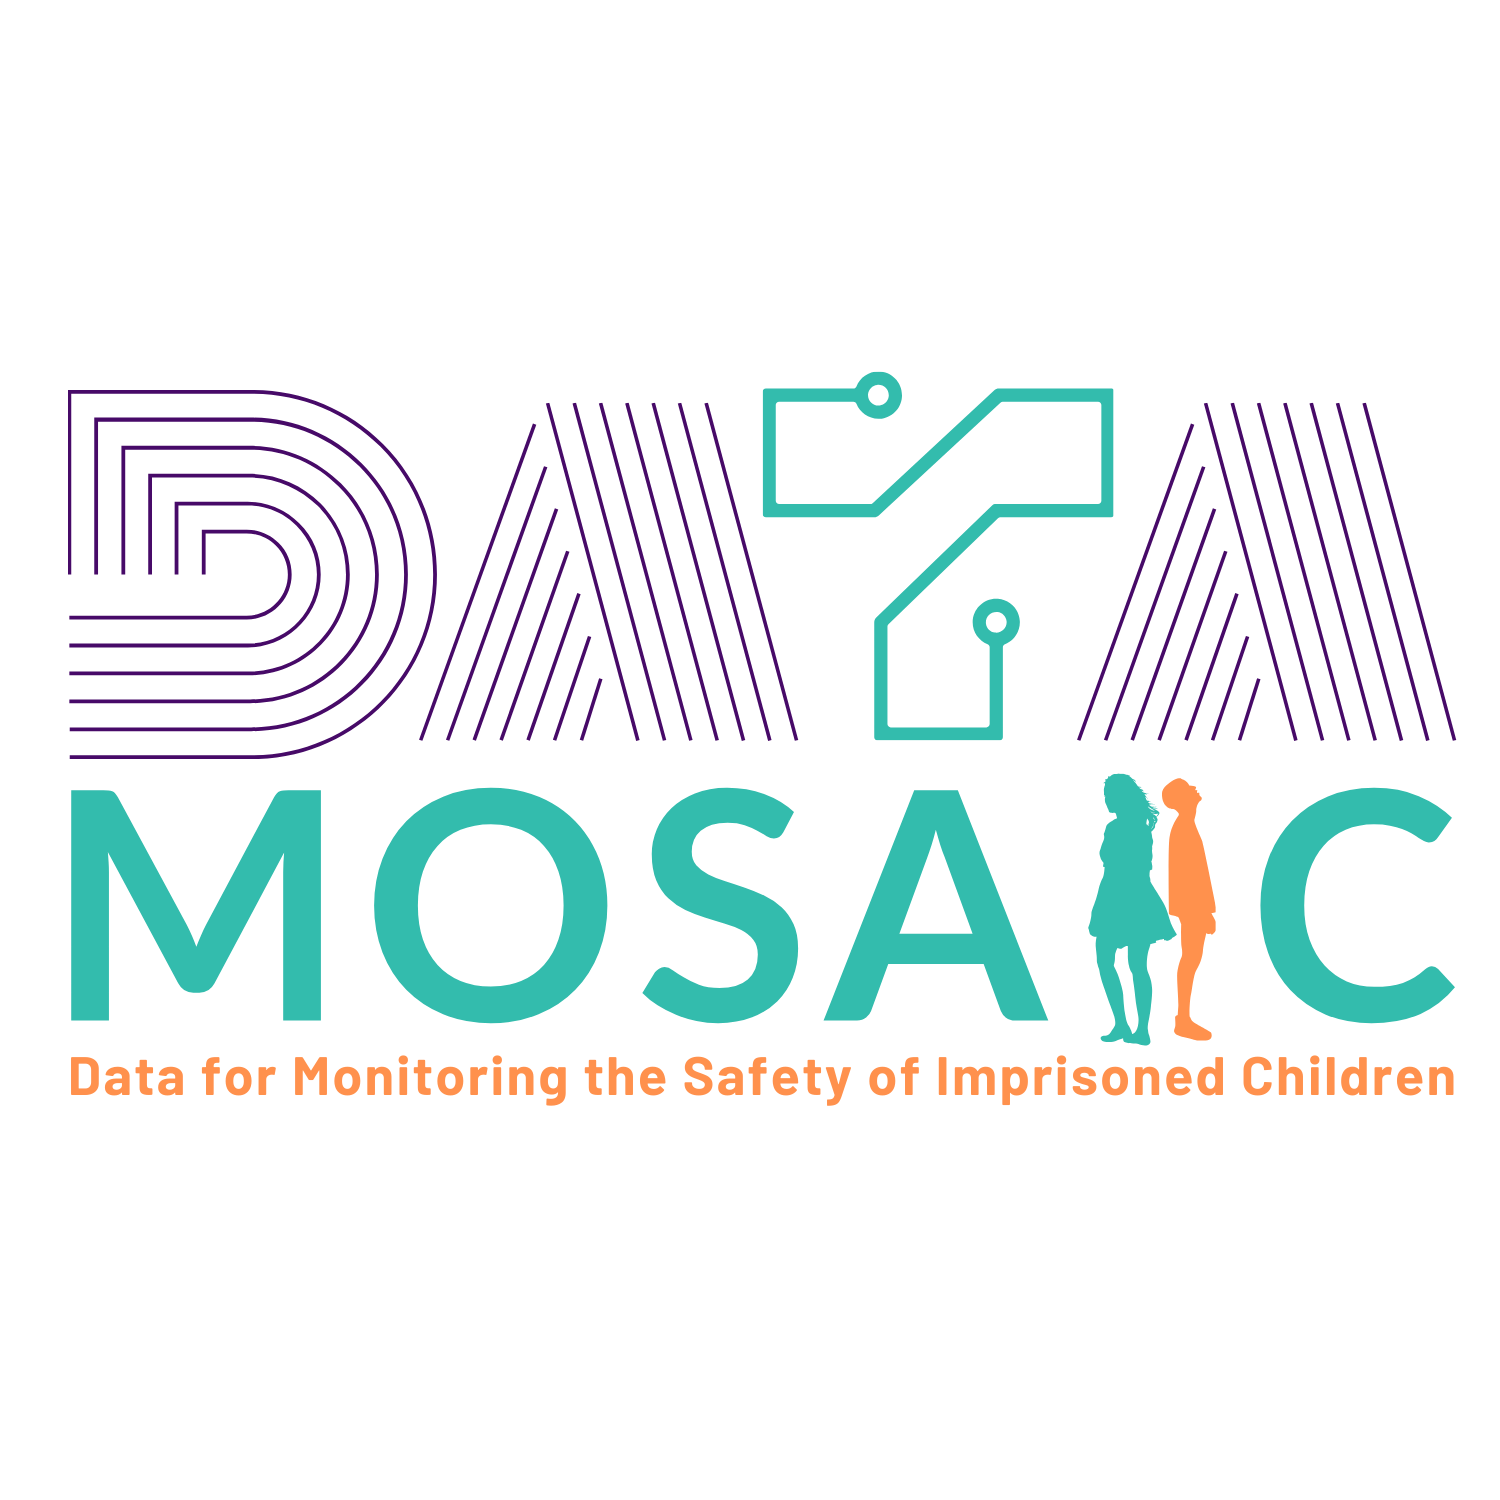 Data MOSAIC Data for Monitoring the Safety of Imprisoned Children